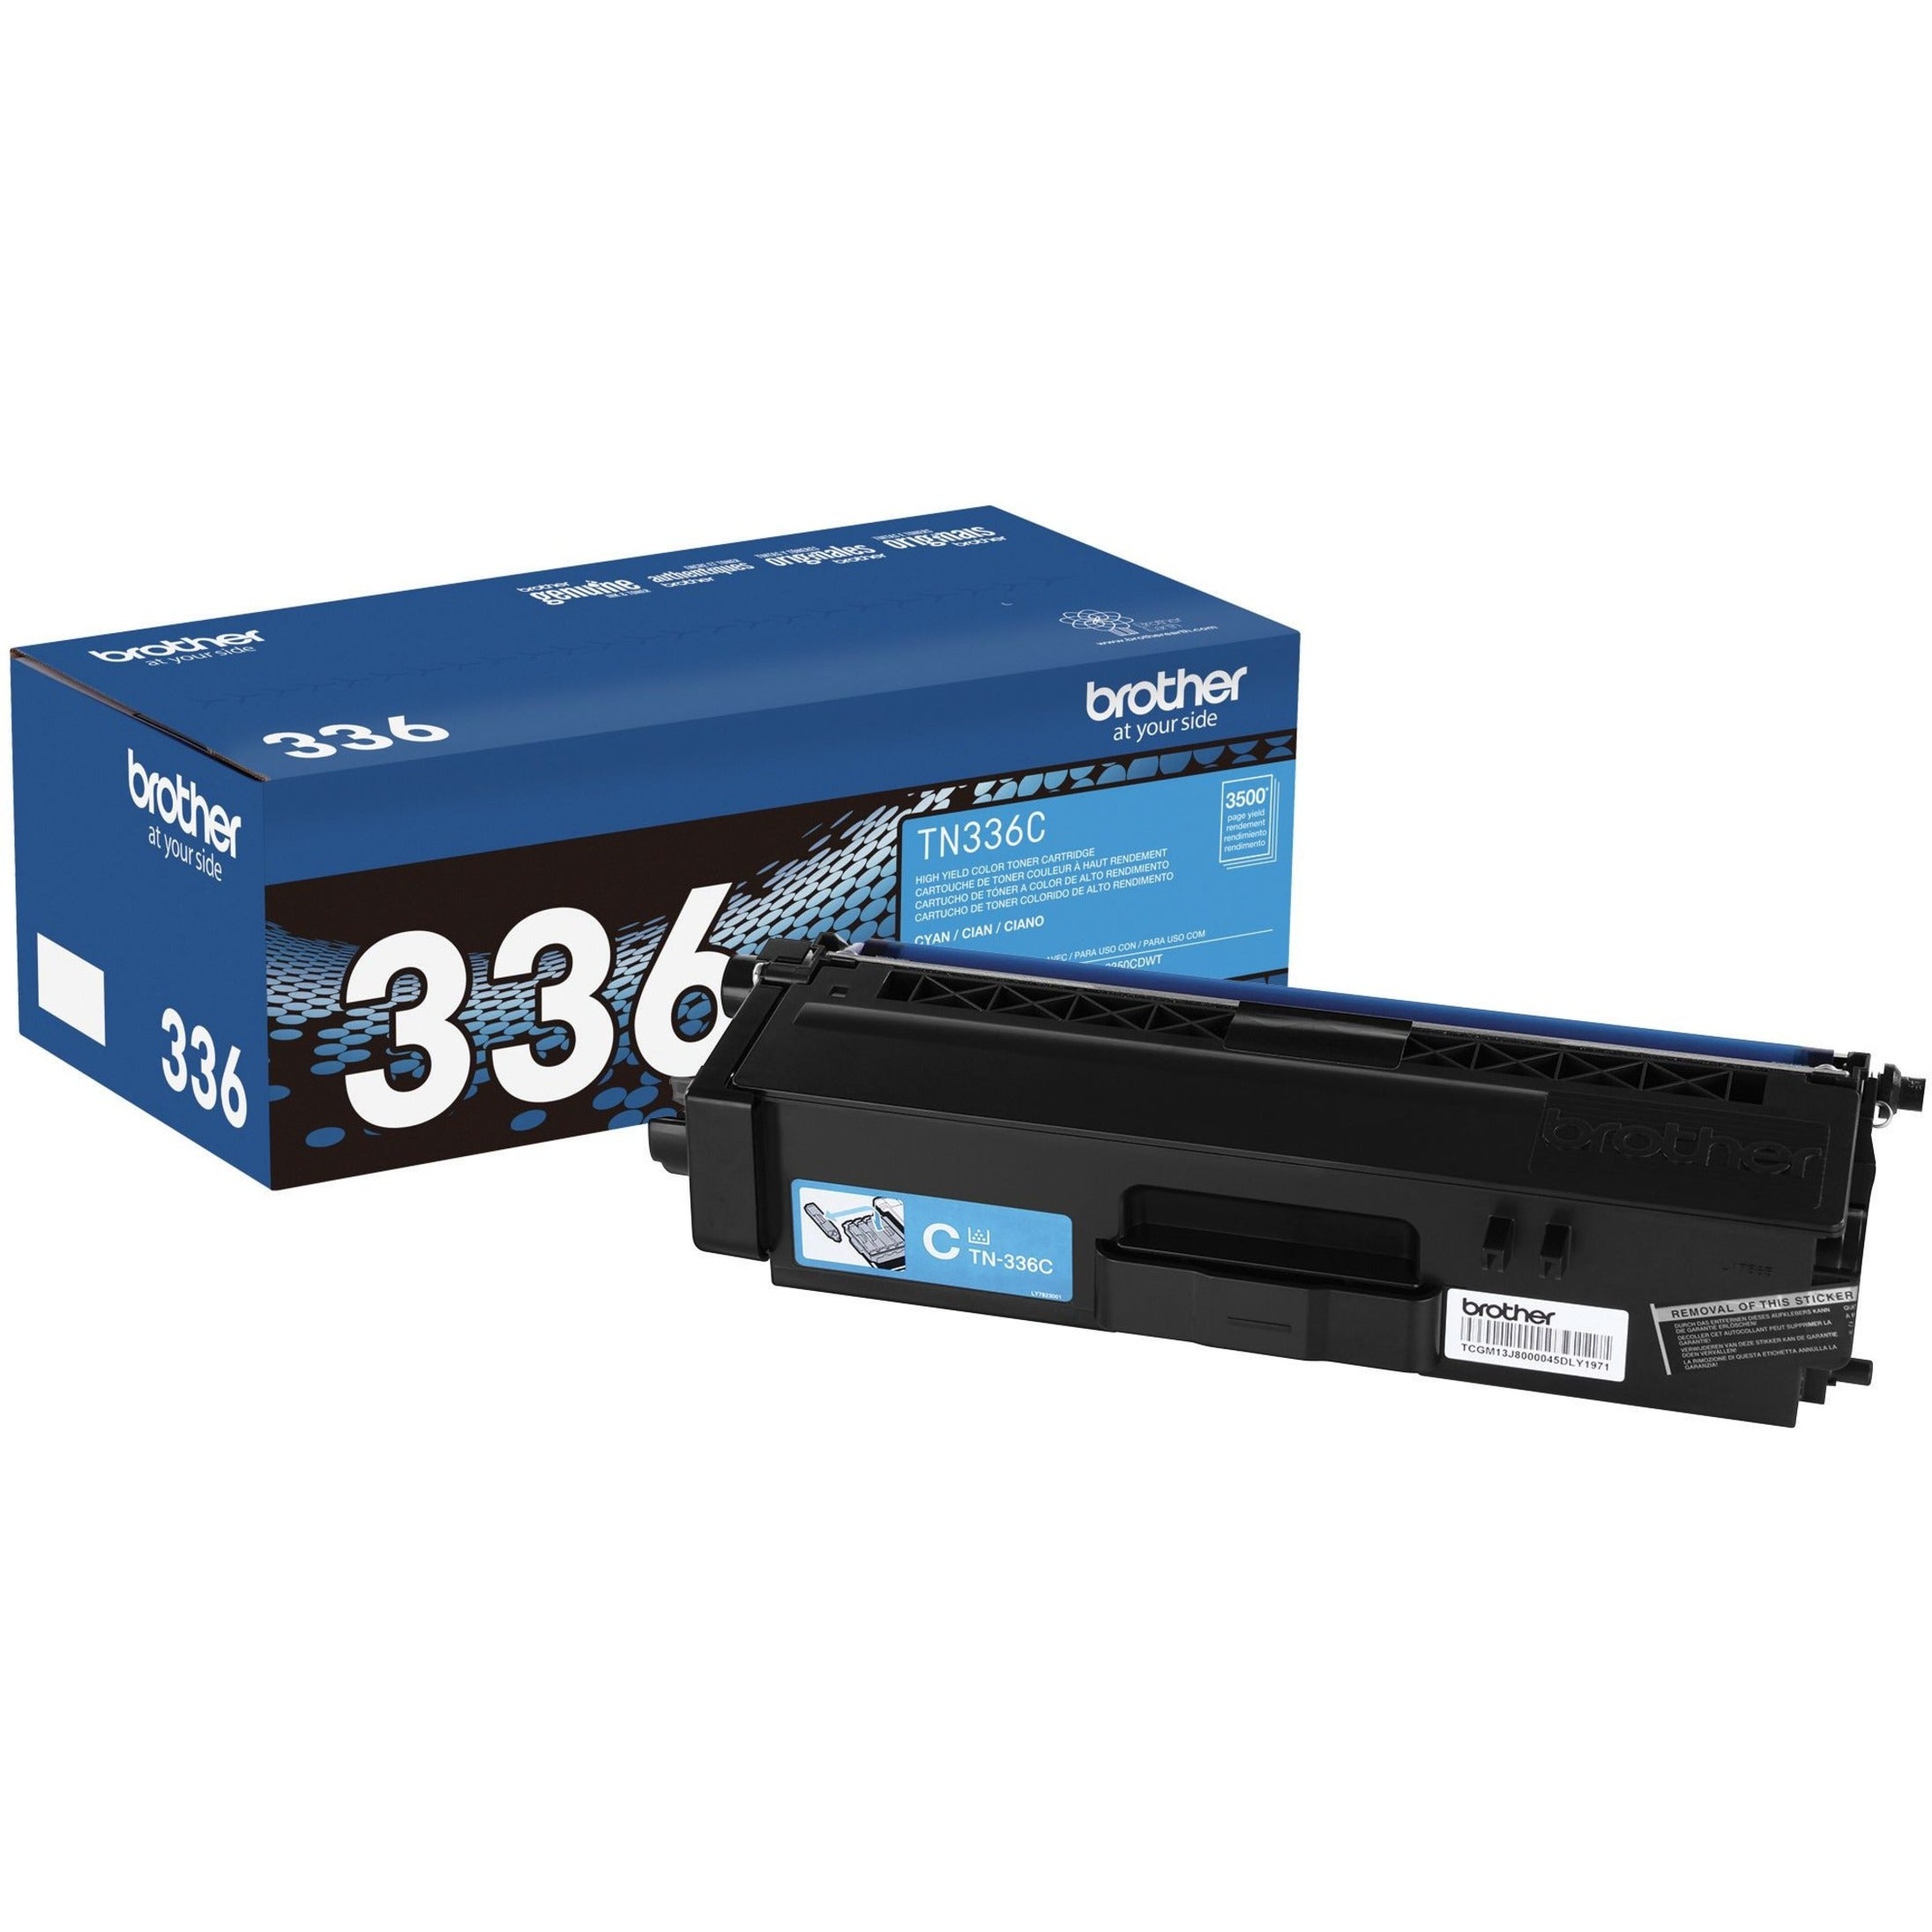 Brother TN336C High Yield Cyan Toner Cartridge, Genuine Brother Printer Toner, 3500 Pages Yield